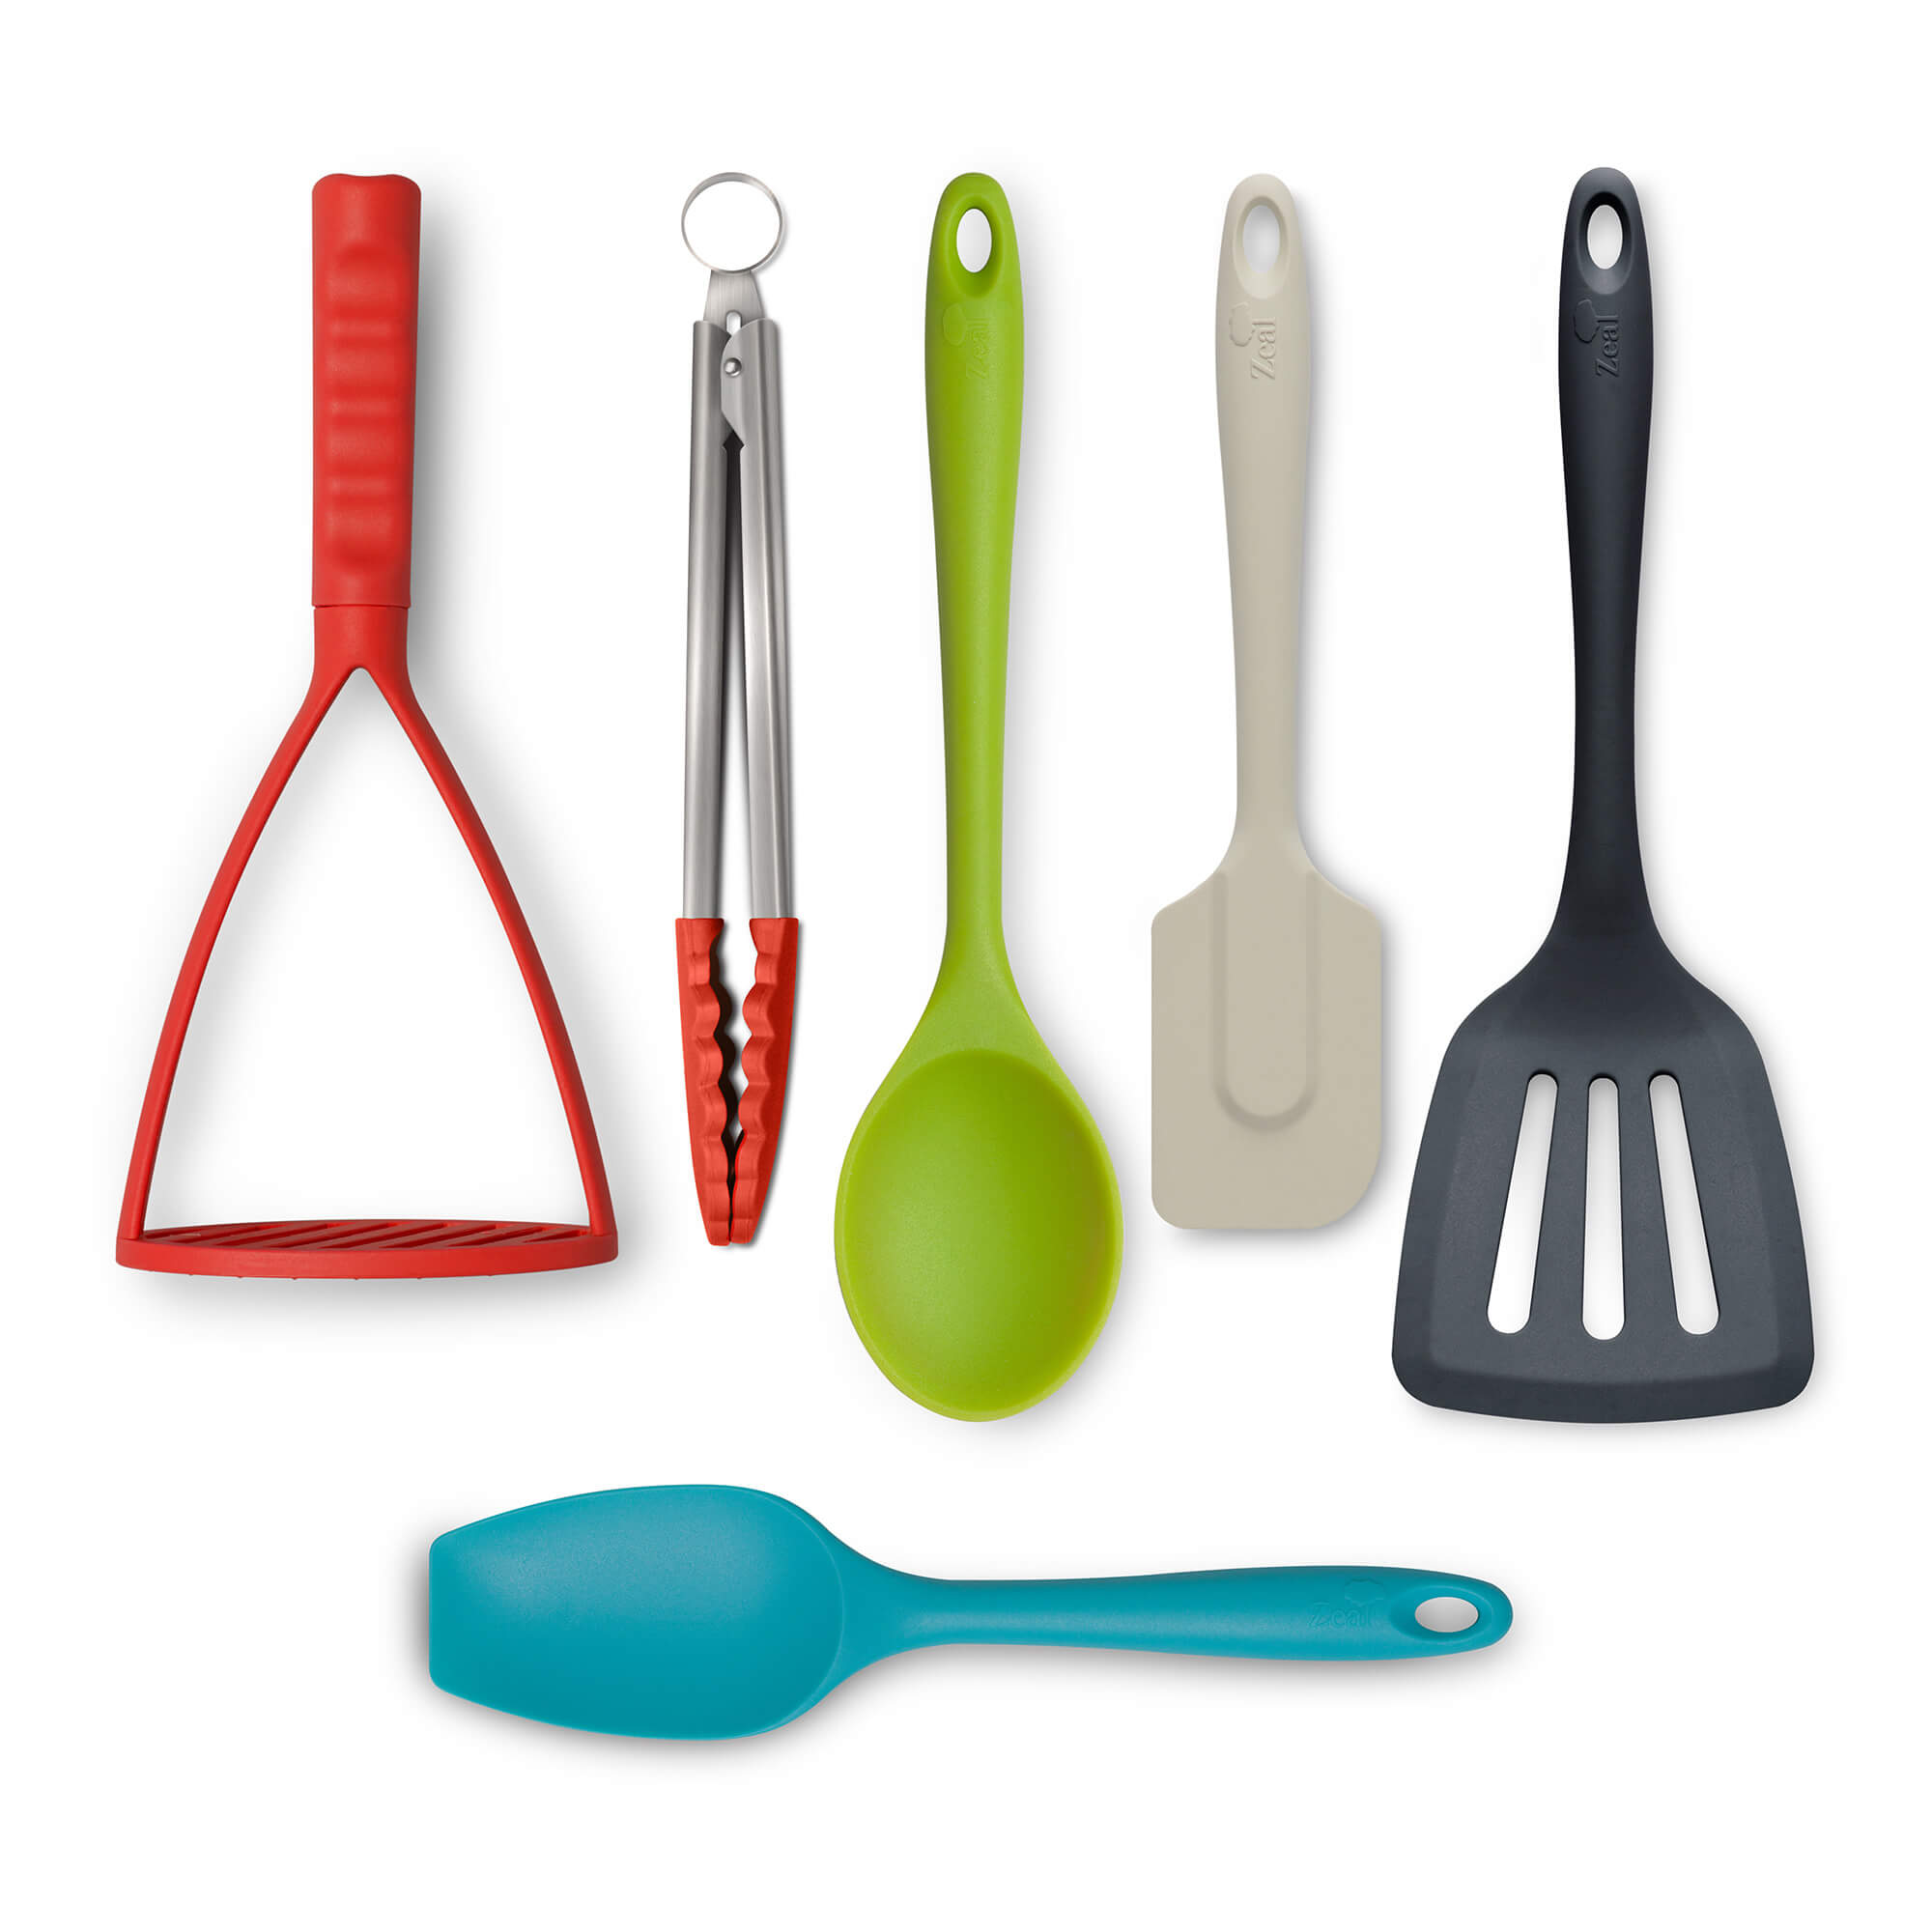 Flexitech Silicone Masher, Tools, Utensils & Gadgets